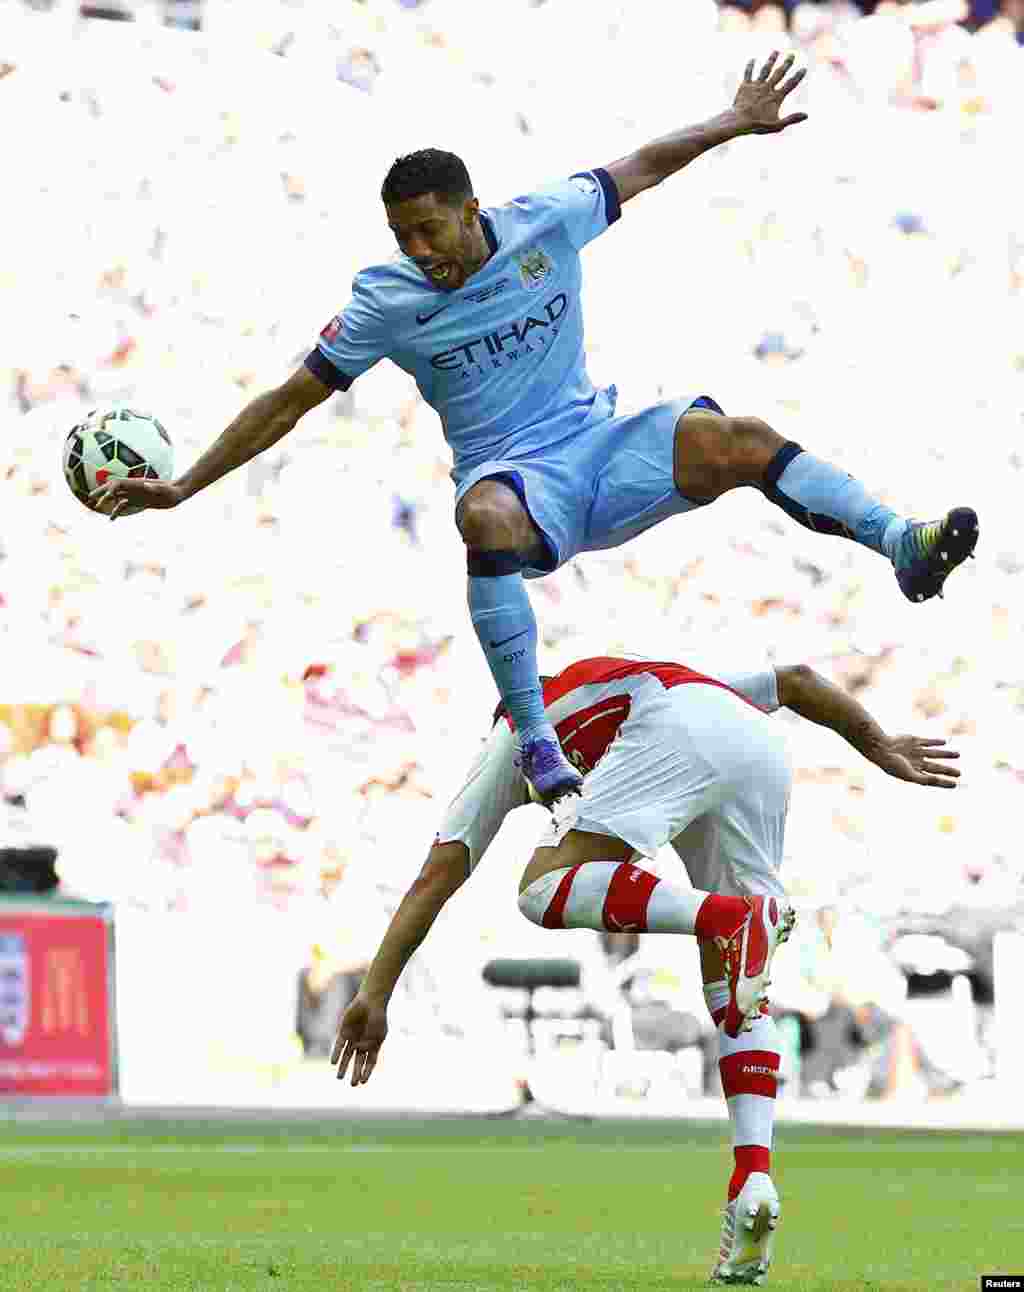 Manchester City&#39;s Gael Clichy (top) leaps above Arsenal&#39;s Santi Cazorla during their English Community Shield soccer match at Wembley Stadium in London.